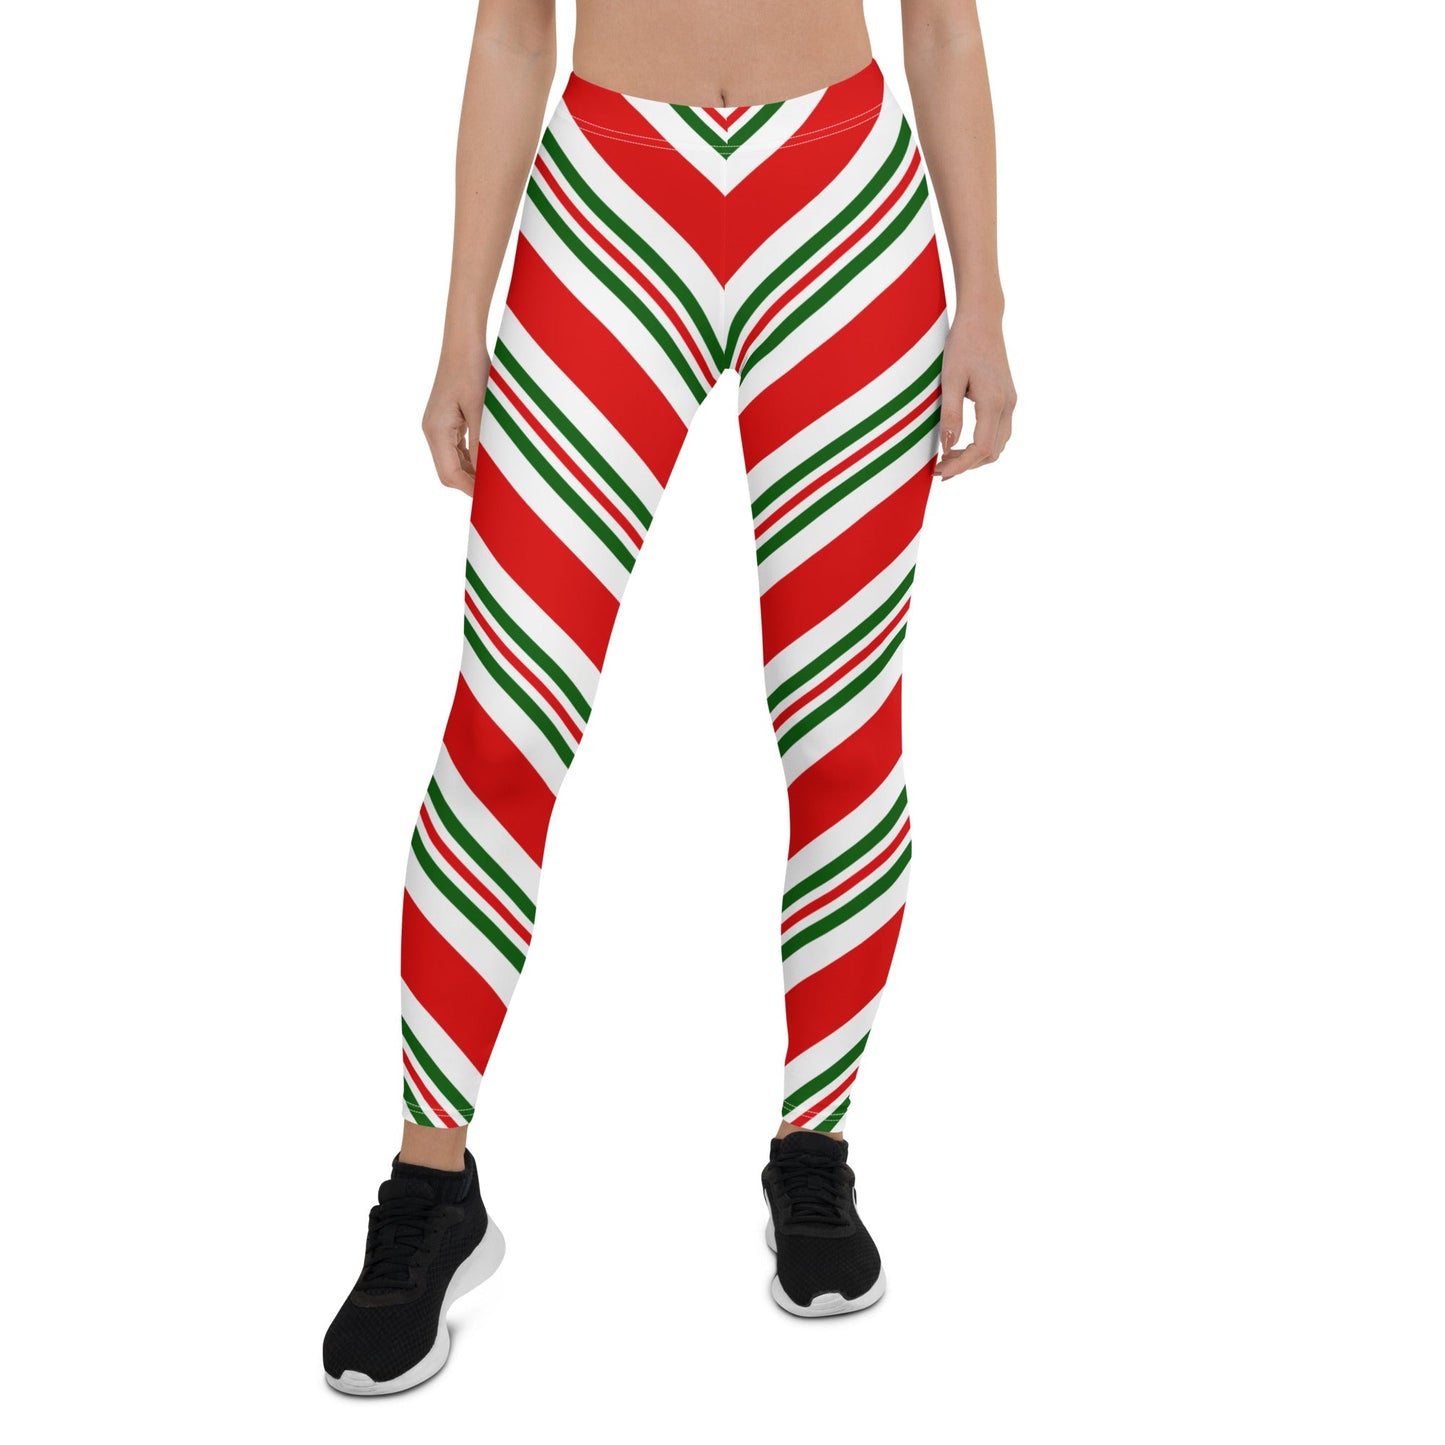 Candy Cane Stripe Leggings, Mommy Me Red White Green Christmas Elf Xmas Adult Yoga Toddler Girl Kids Workout Winter Women Plus Size Pants Starcove Fashion